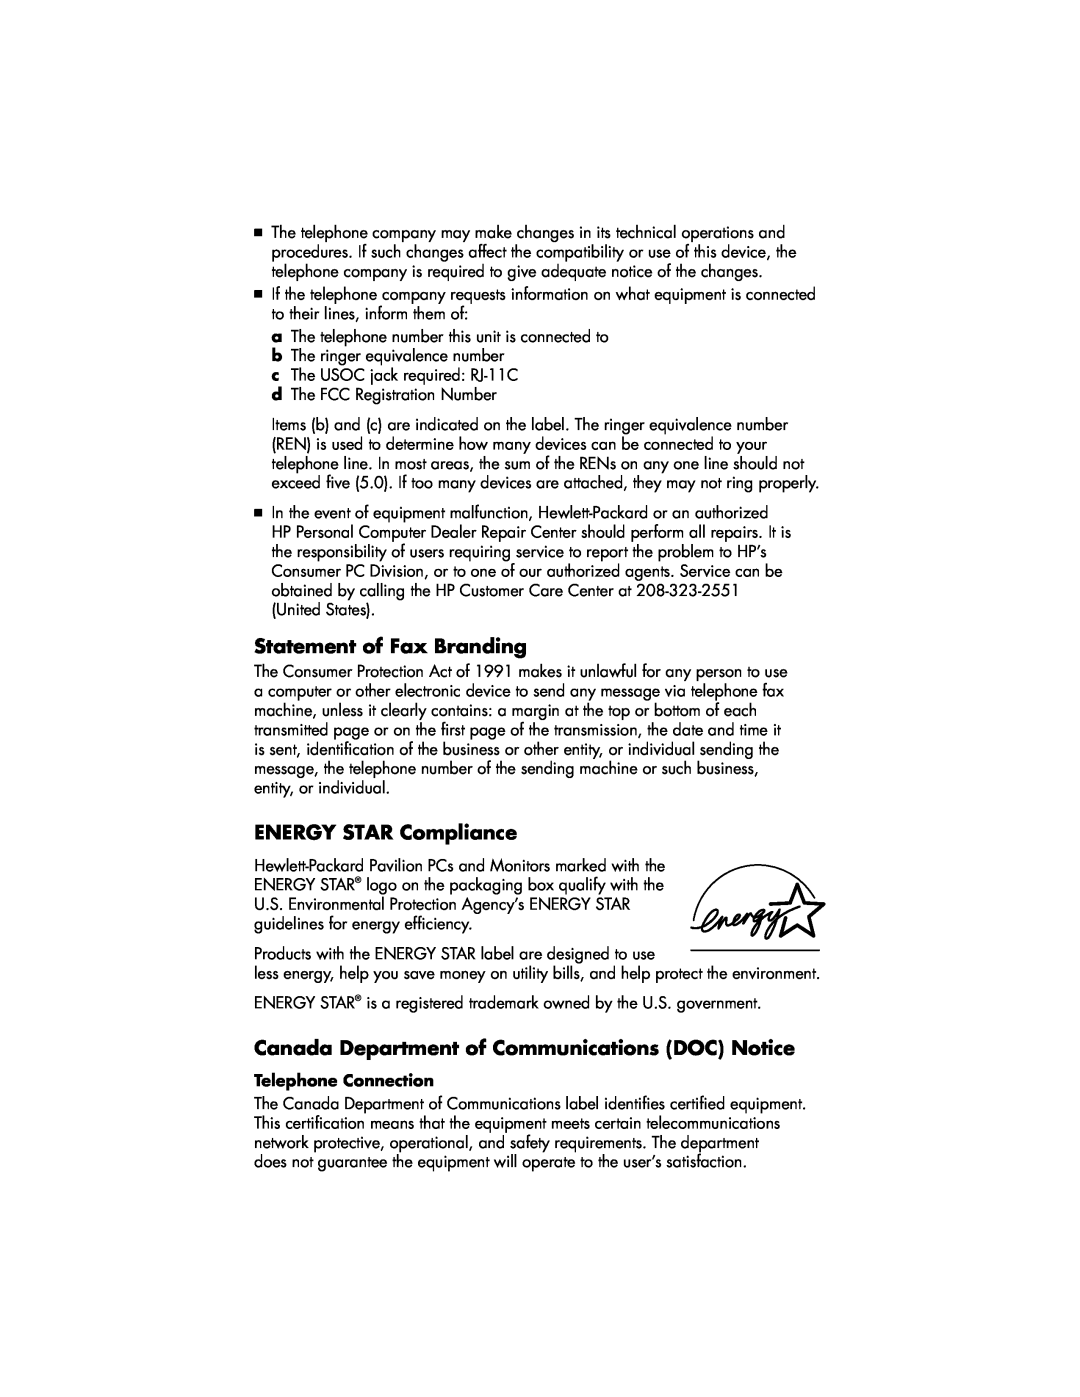 HP 764n (US/CAN) manual Statement of Fax Branding, ENERGY STAR Compliance, Canada Department of Communications DOC Notice 